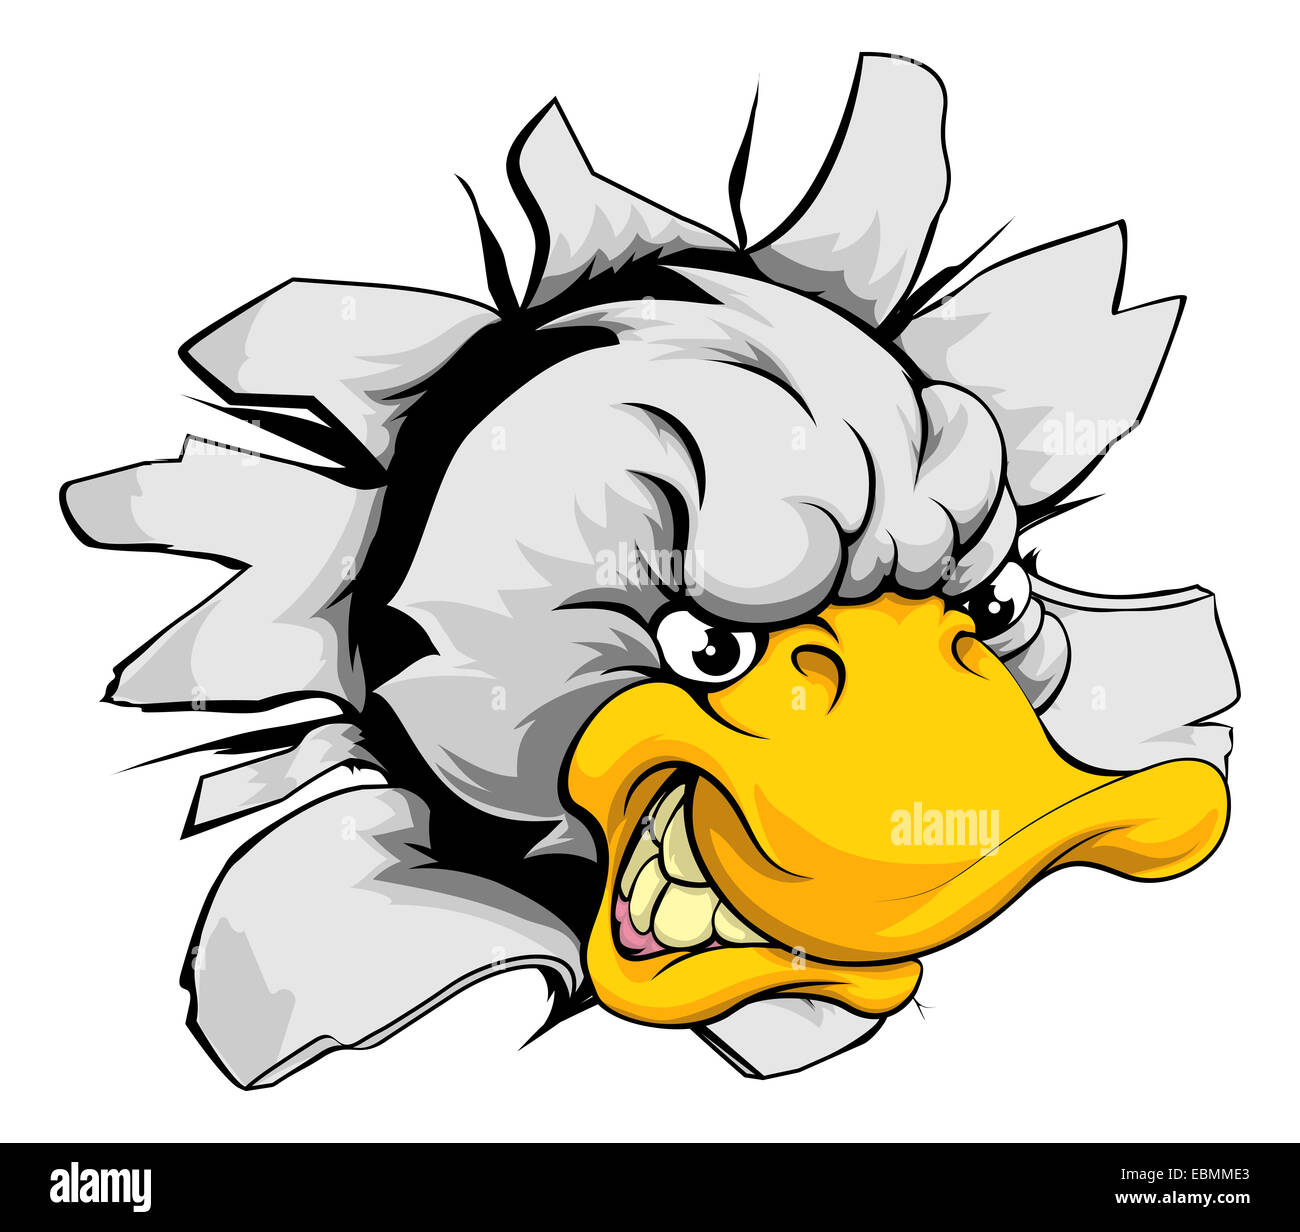 A mean looking duck animal mascot breaking through a wall Stock Photo